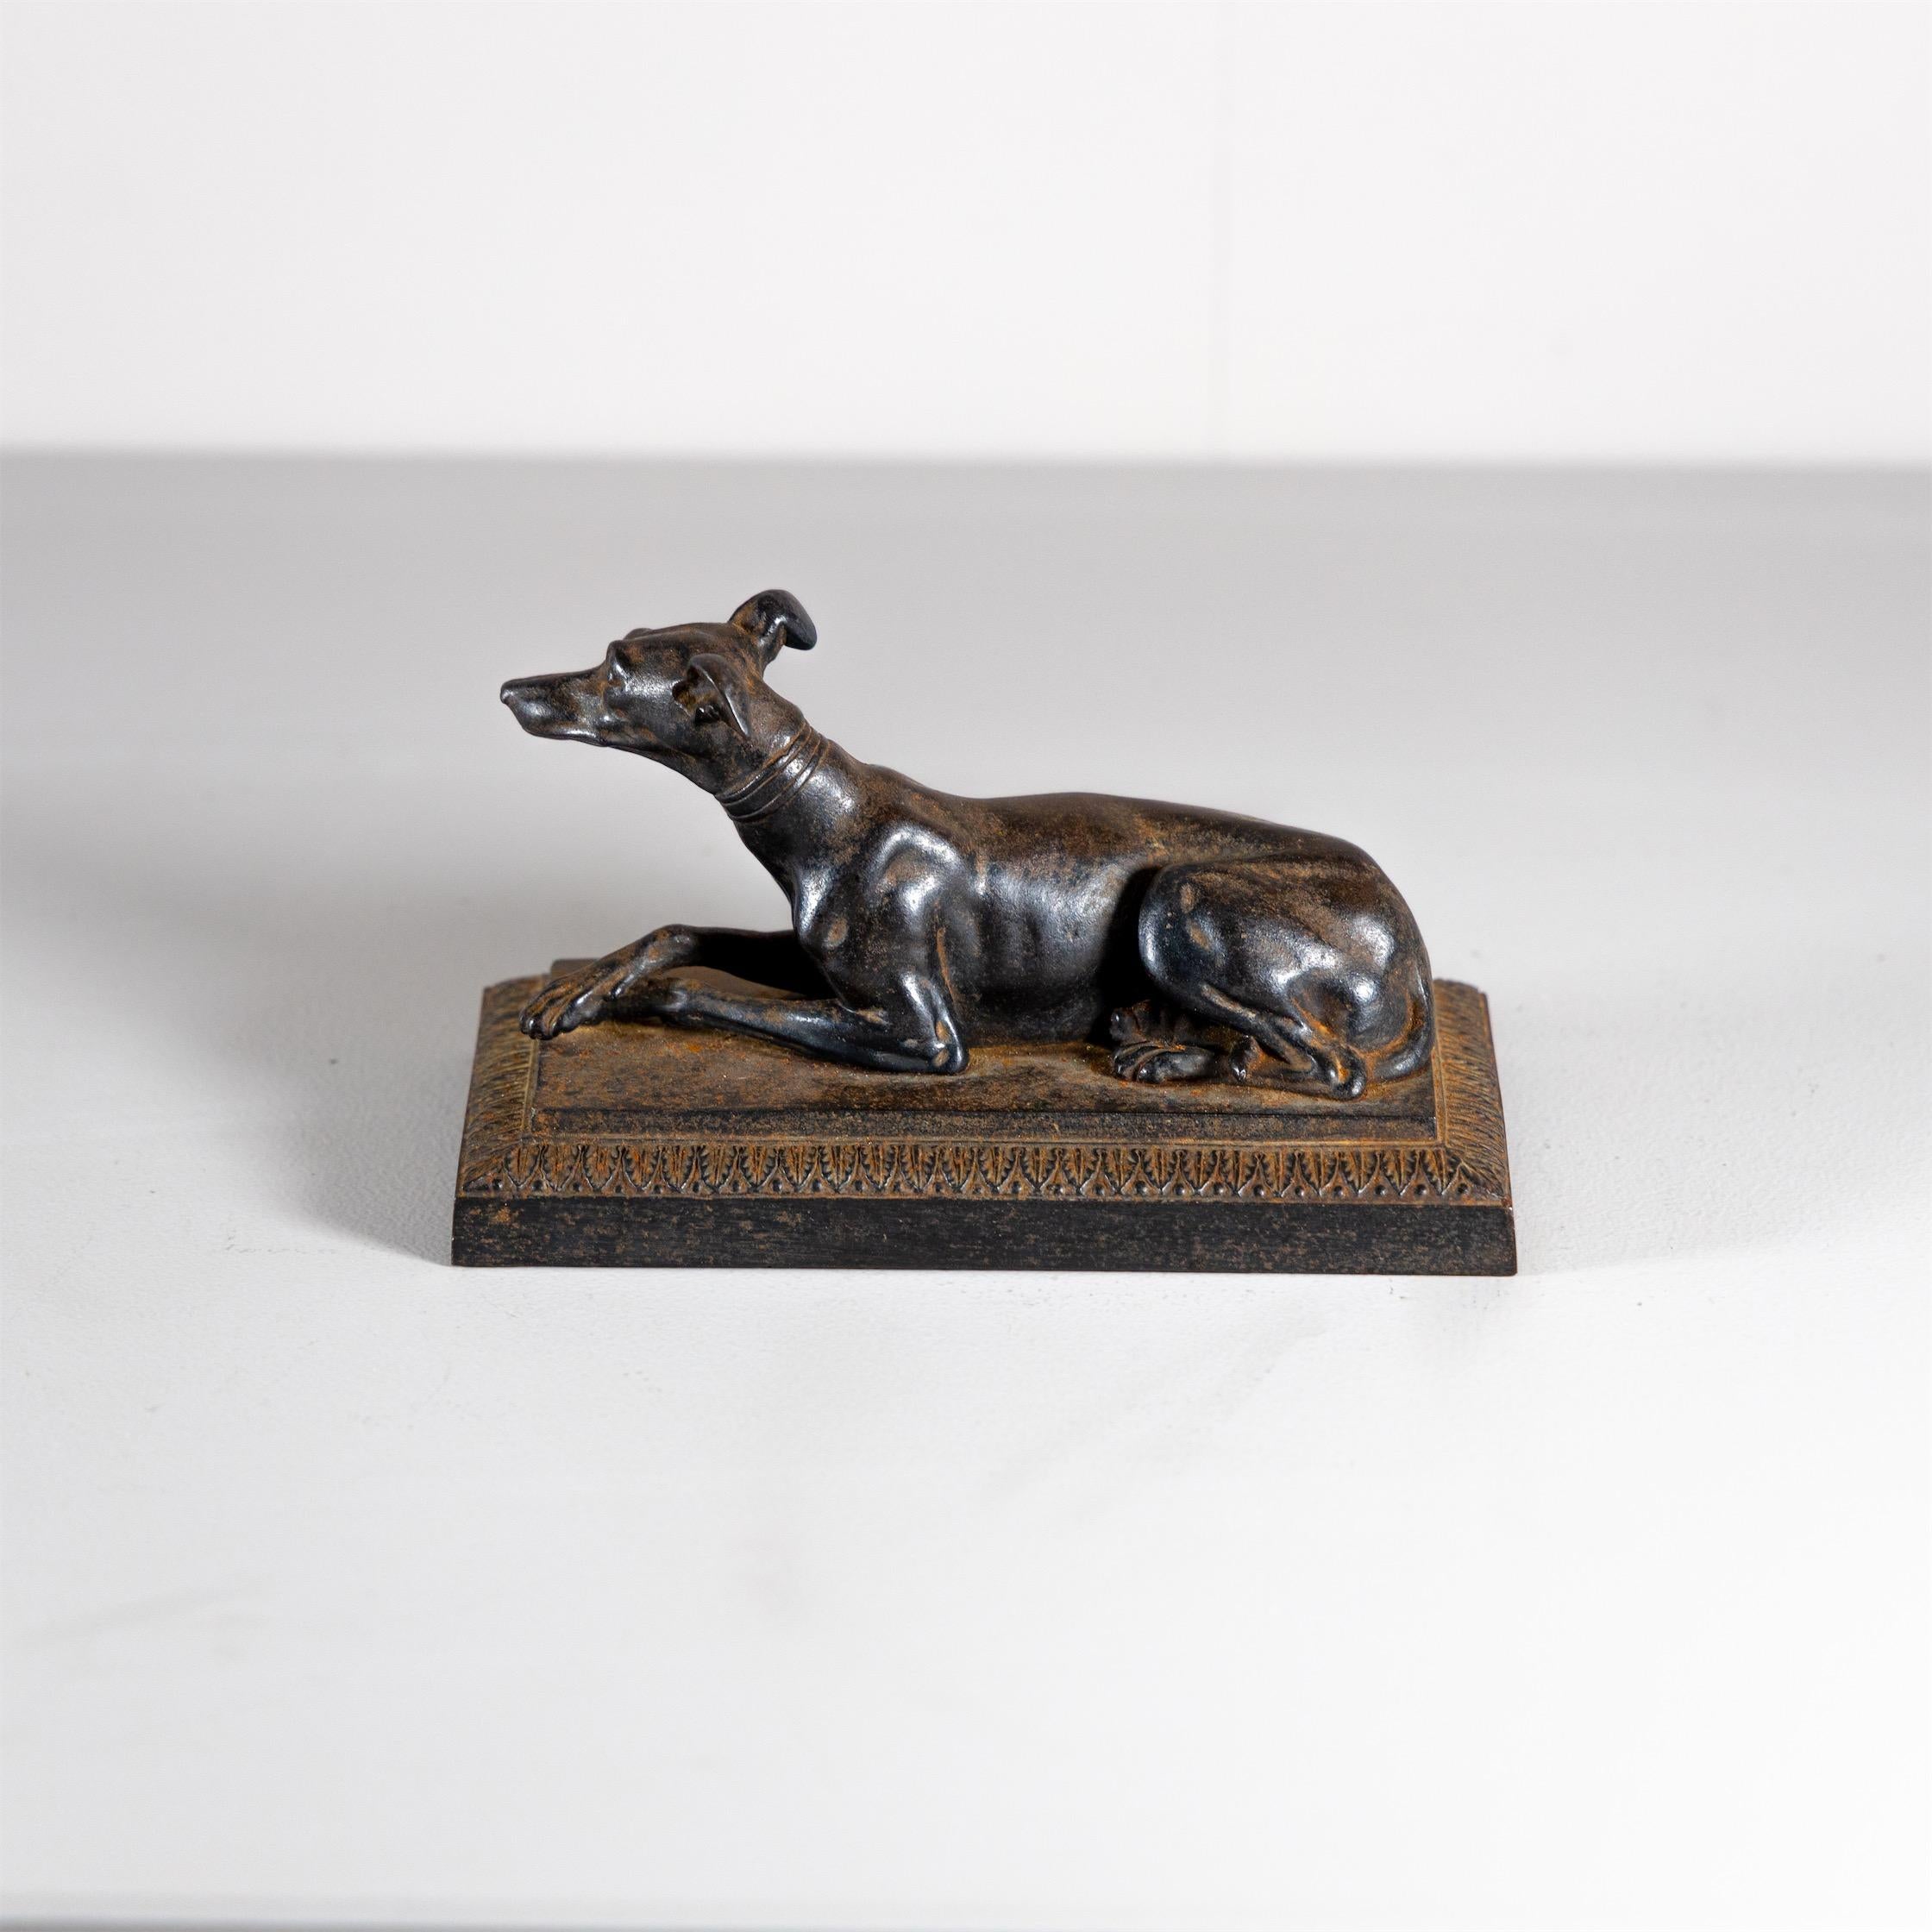 Small figure in the form of a lying greyhound, Berlin iron casting around 1820.